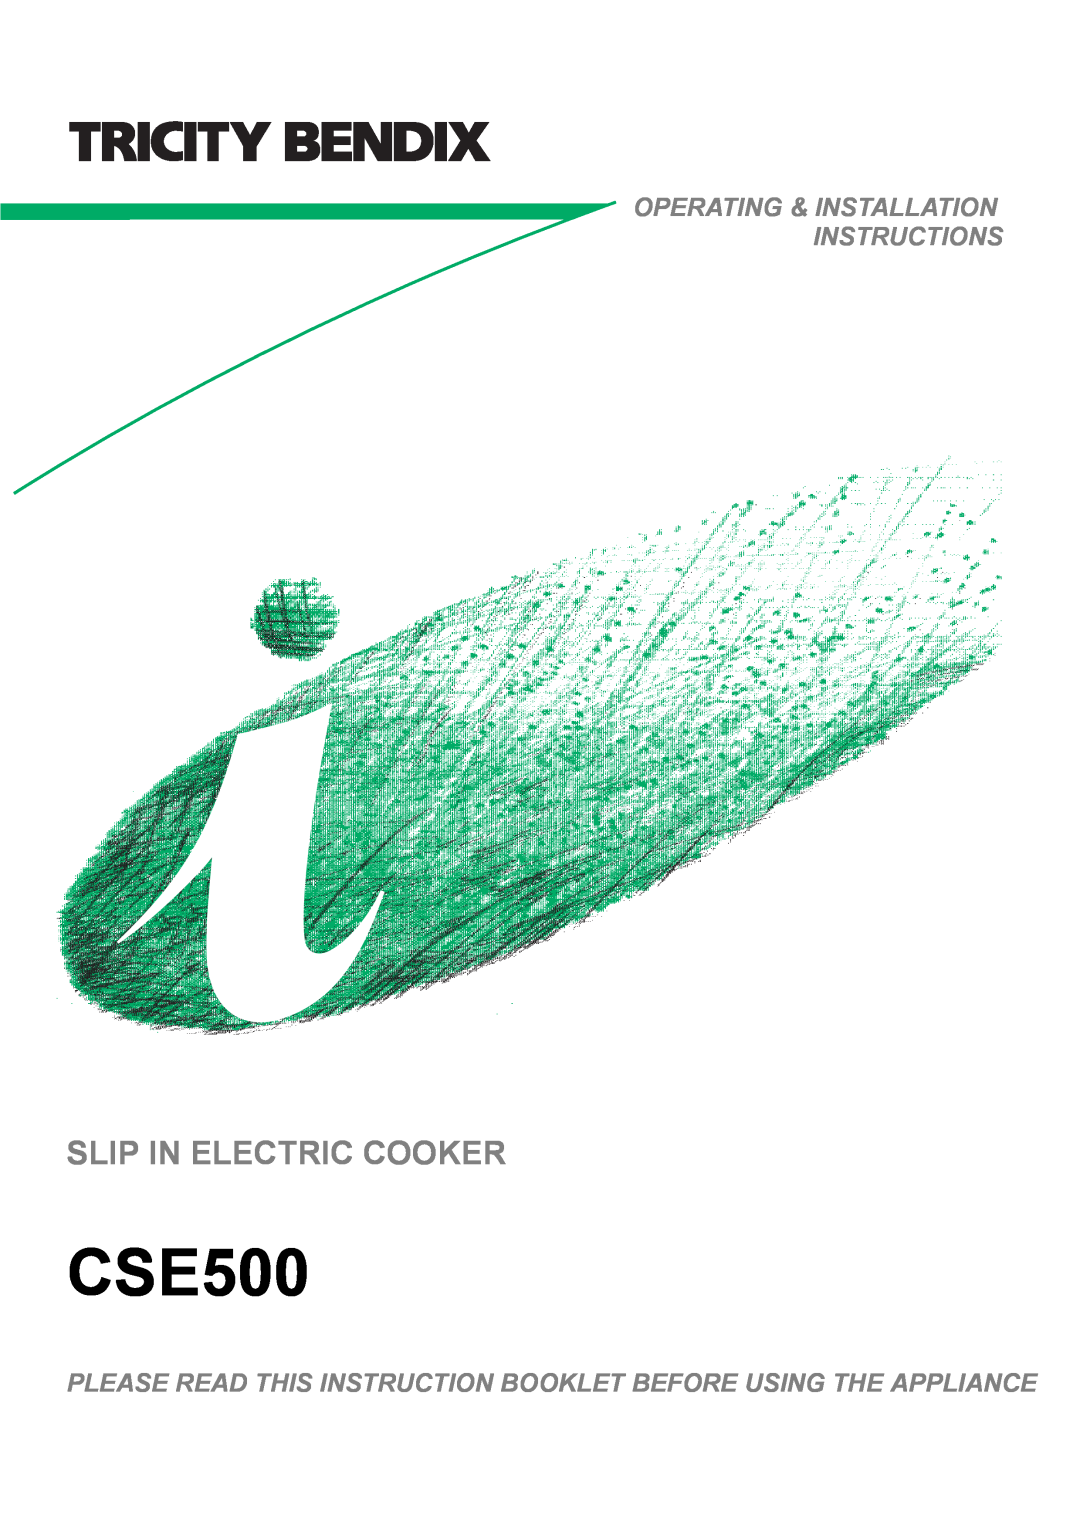 Tricity Bendix CSE500 installation instructions Slip In Electric Cooker, Operating & Installation Instructions 